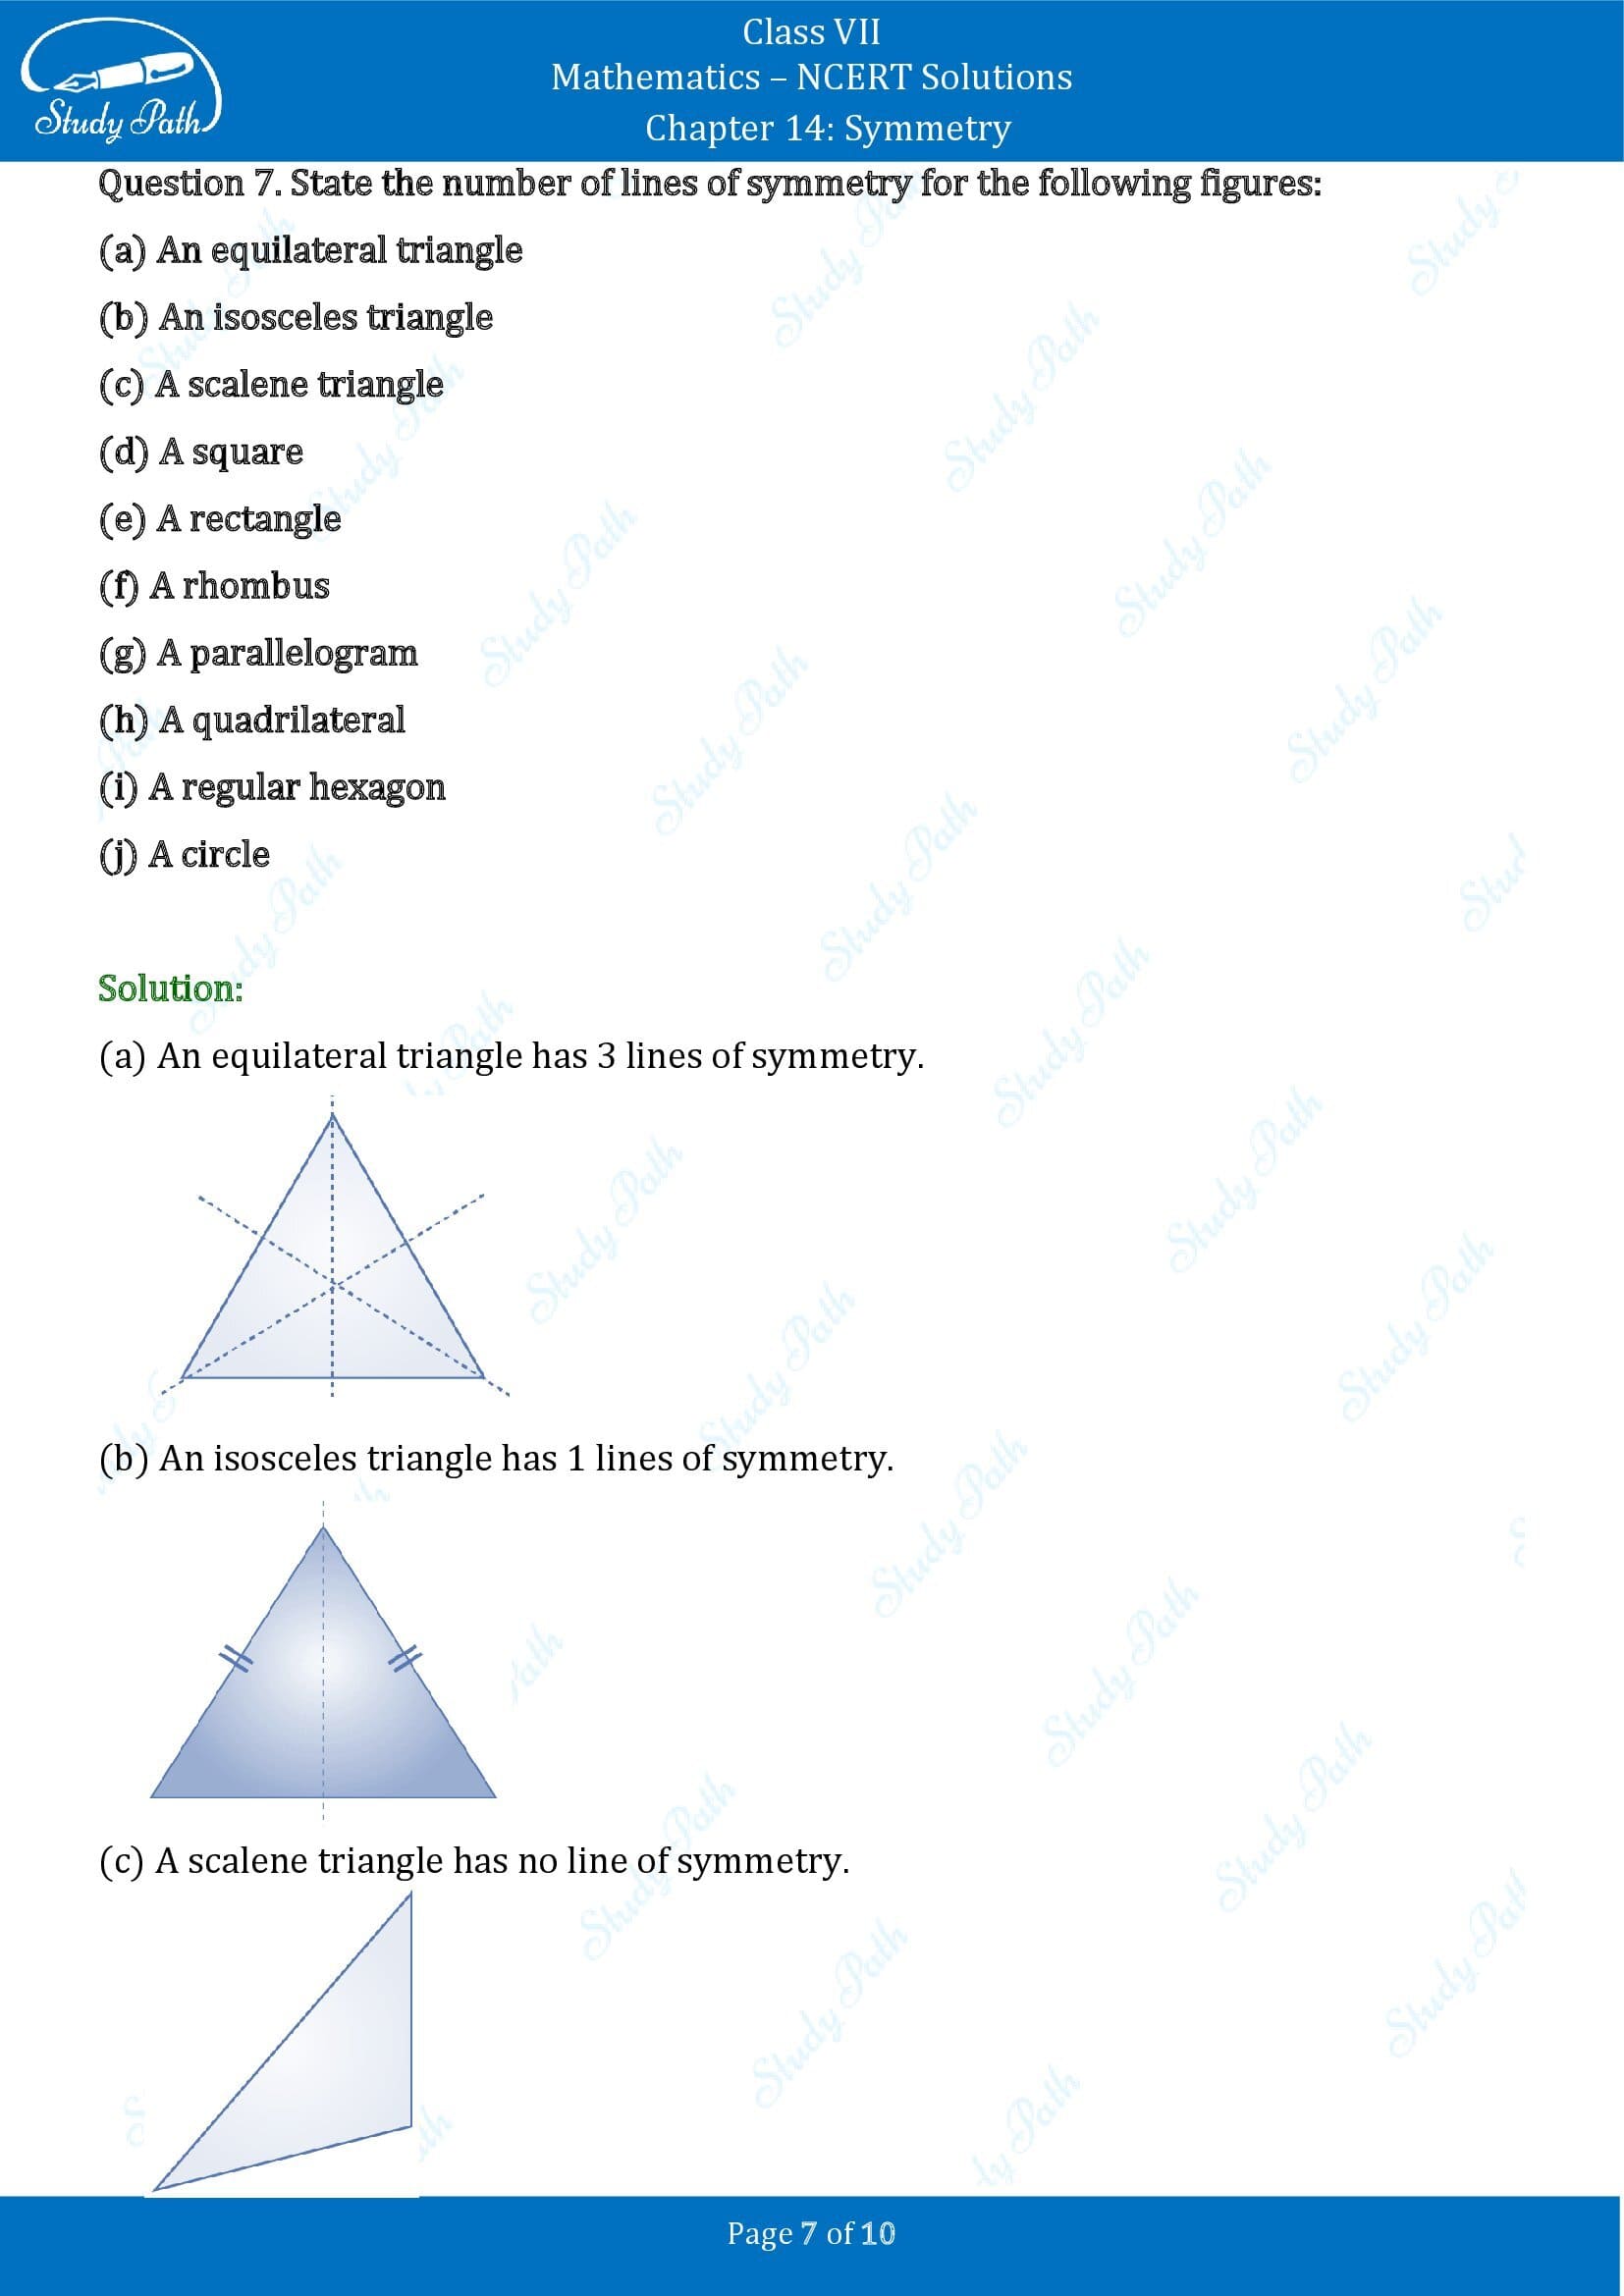 NCERT Solutions for Class 7 Maths Chapter 14 Symmetry Exercise 14.1 00007